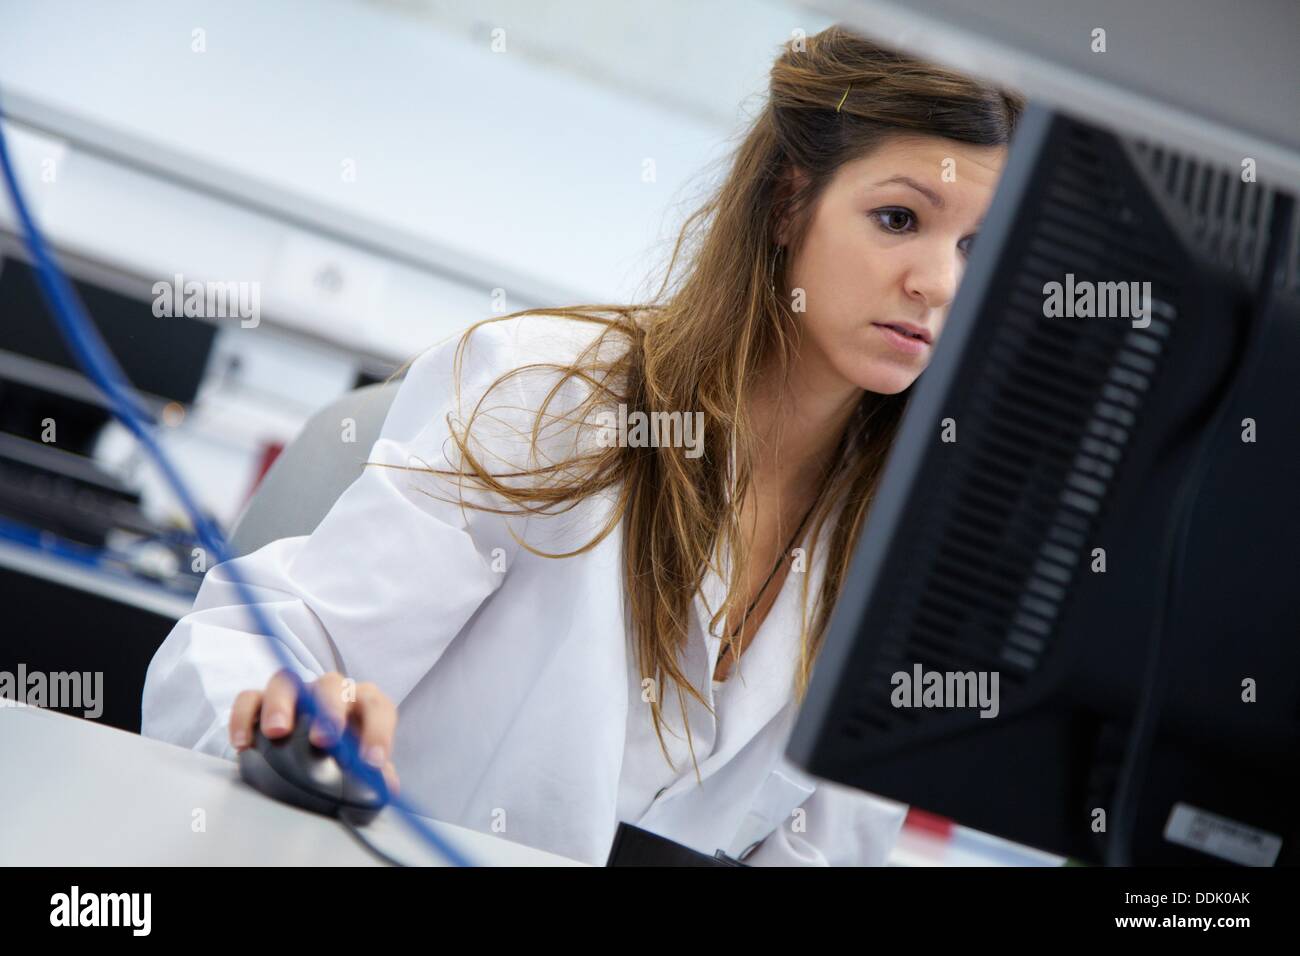 Student in the Biomedical Instrumentation Laboratory, Biomedical Engineering,  CEIT (Center of Studies and Technical Research Stock Photo - Alamy